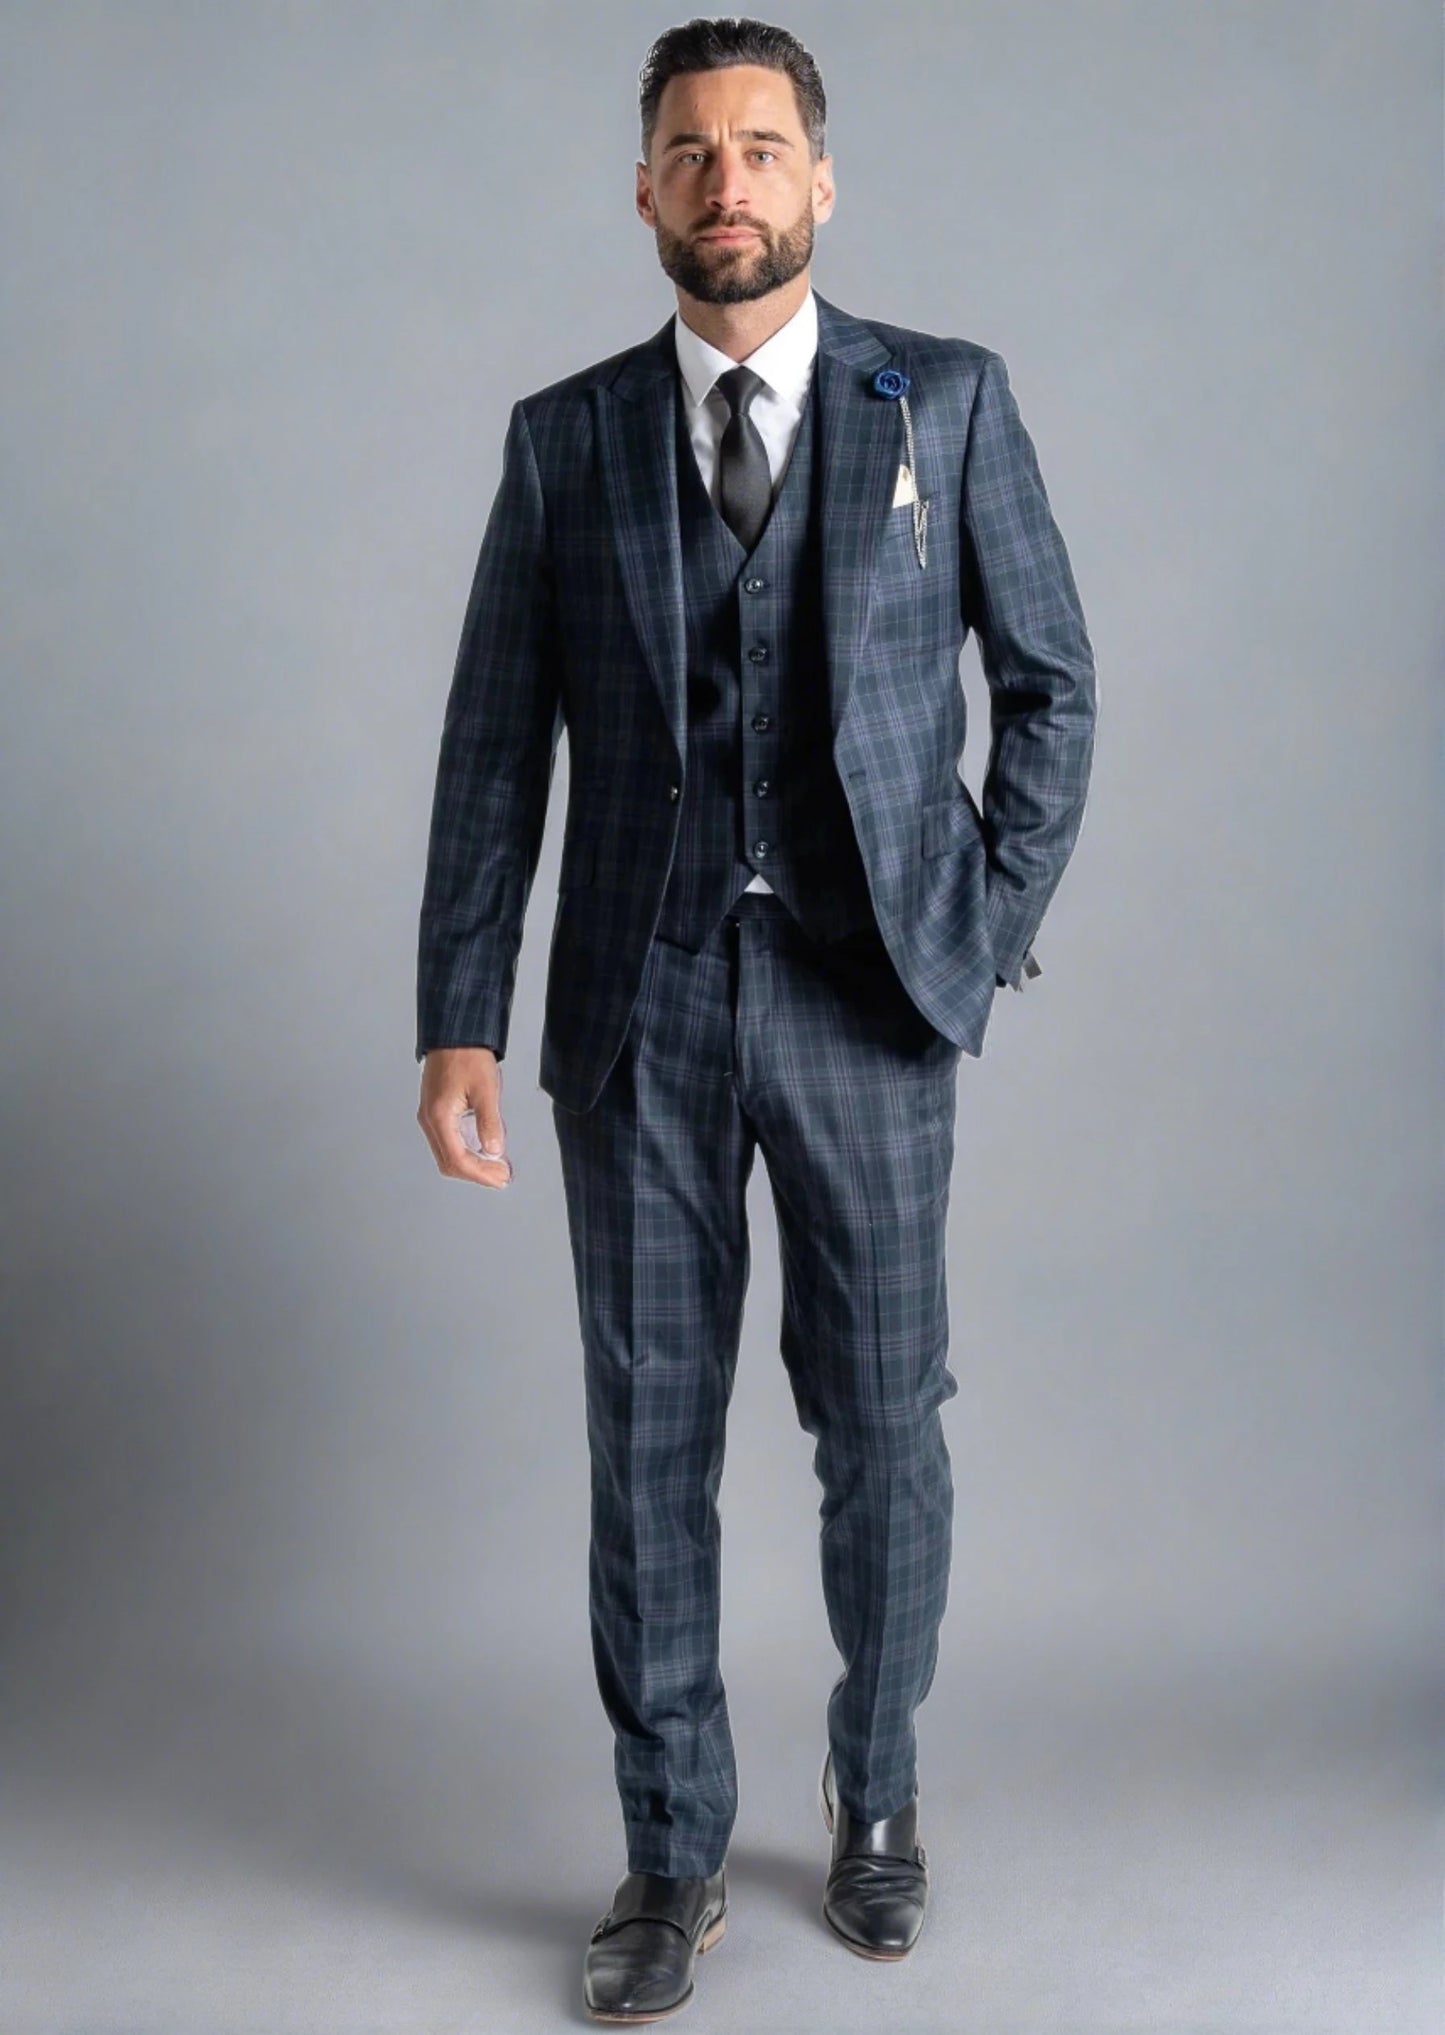 CHARLES NAVY BLUE CHECK 3-PIECE SUIT